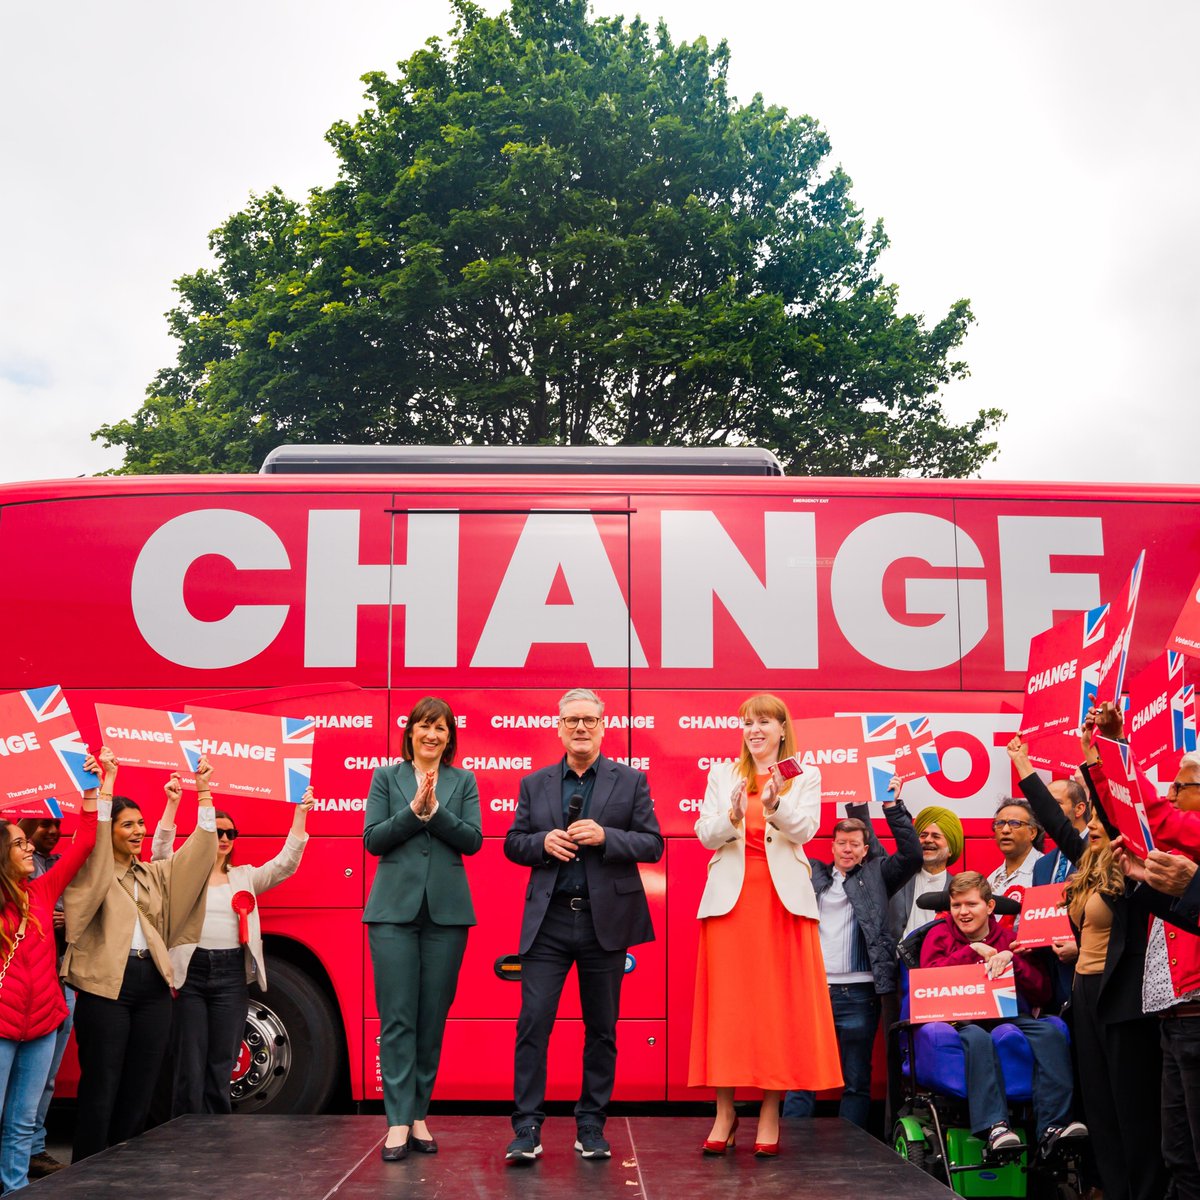 Travelling across Britain this week, one thing was clear: people want change.

Labour is ready to deliver that change.

Vote Labour on Thursday 4 July.